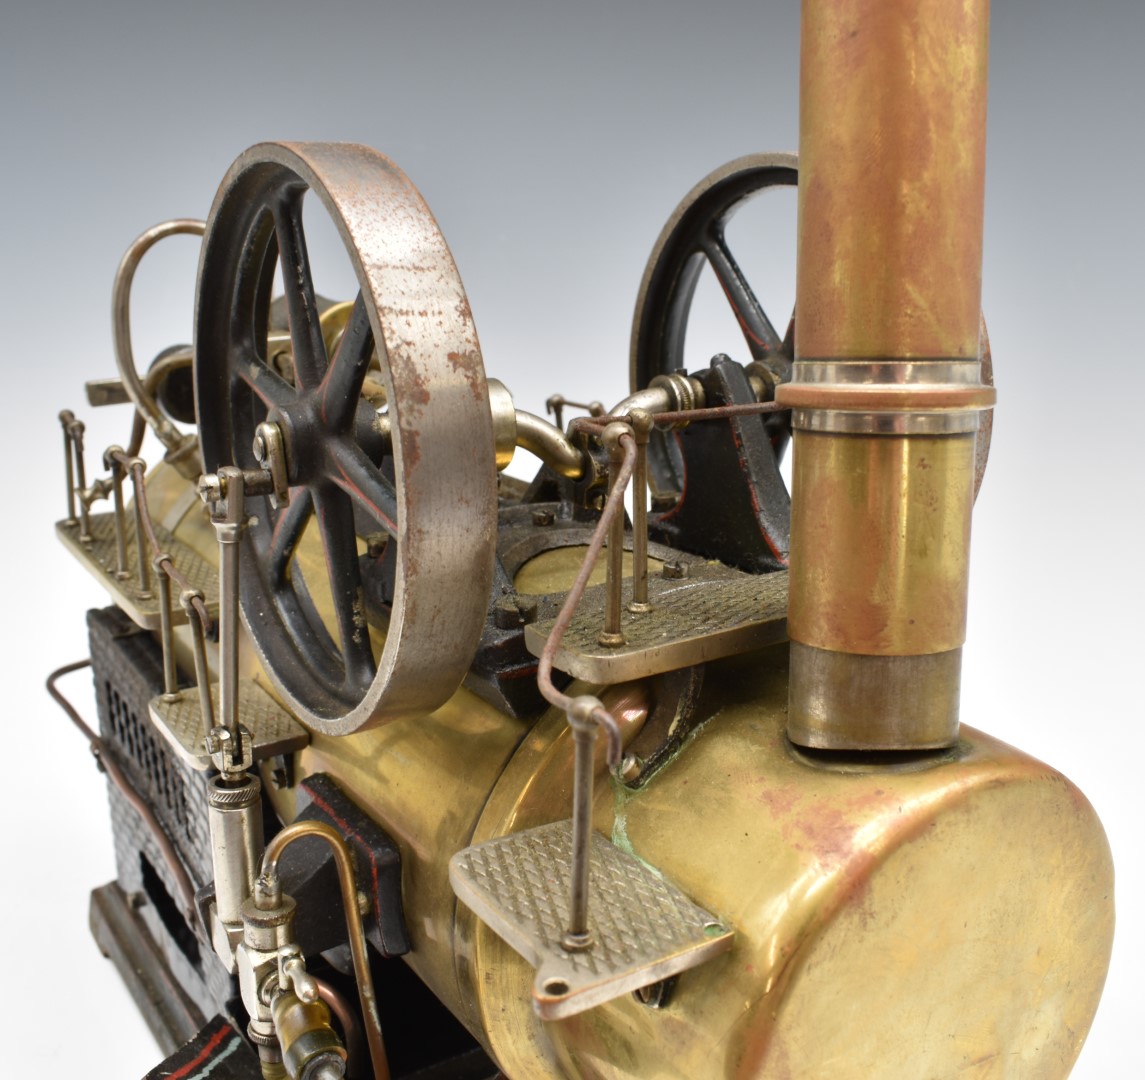 Doll model 520 overtype live steam engine with single cylinder, with twin fly wheels, lever safety - Image 7 of 7